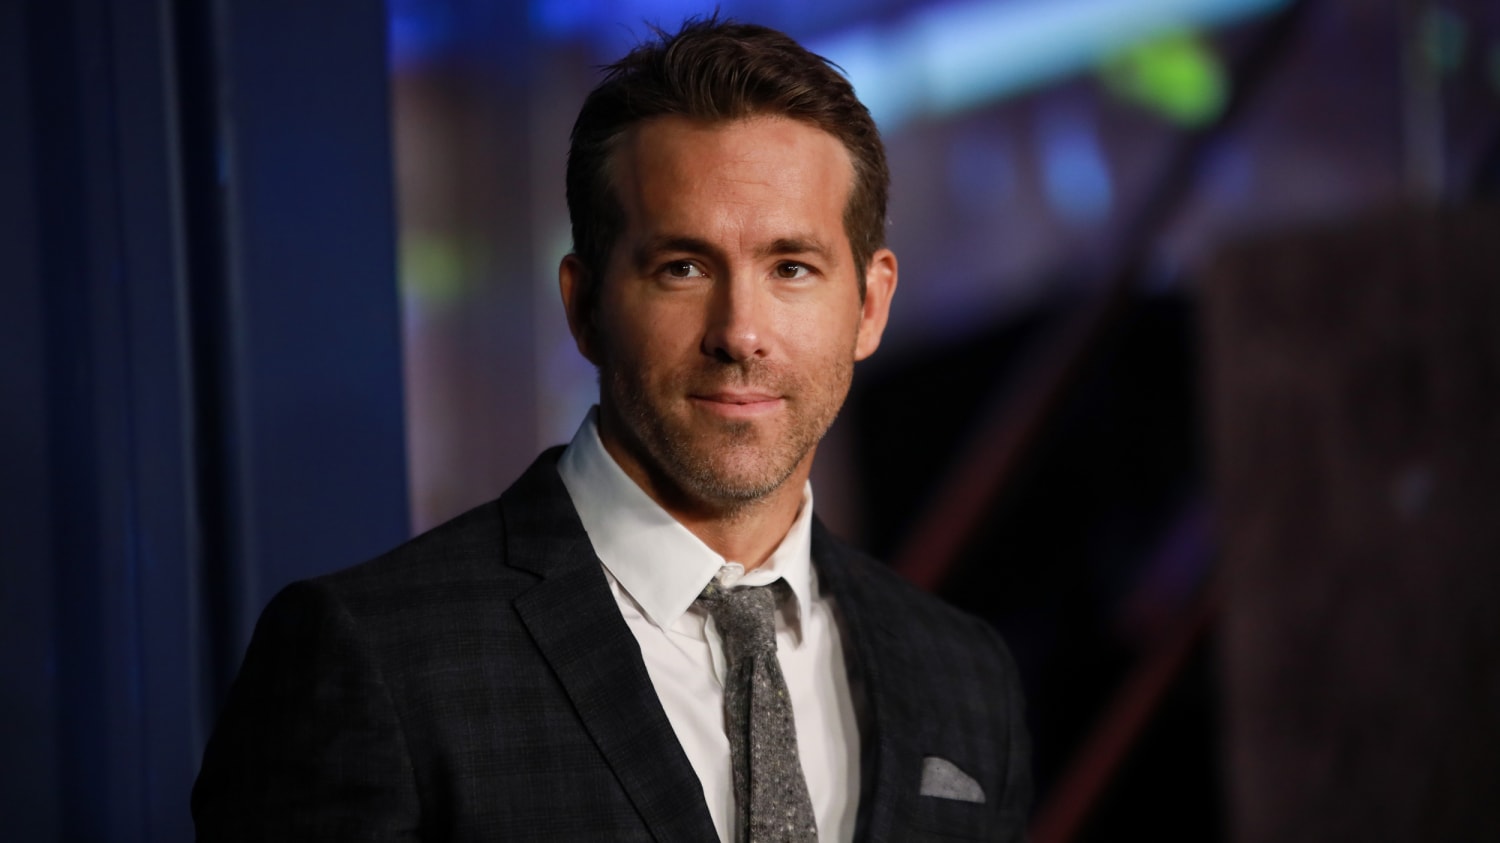 Ryan Reynolds says he gets mistaken for Ben Affleck at this one NYC pizzeria